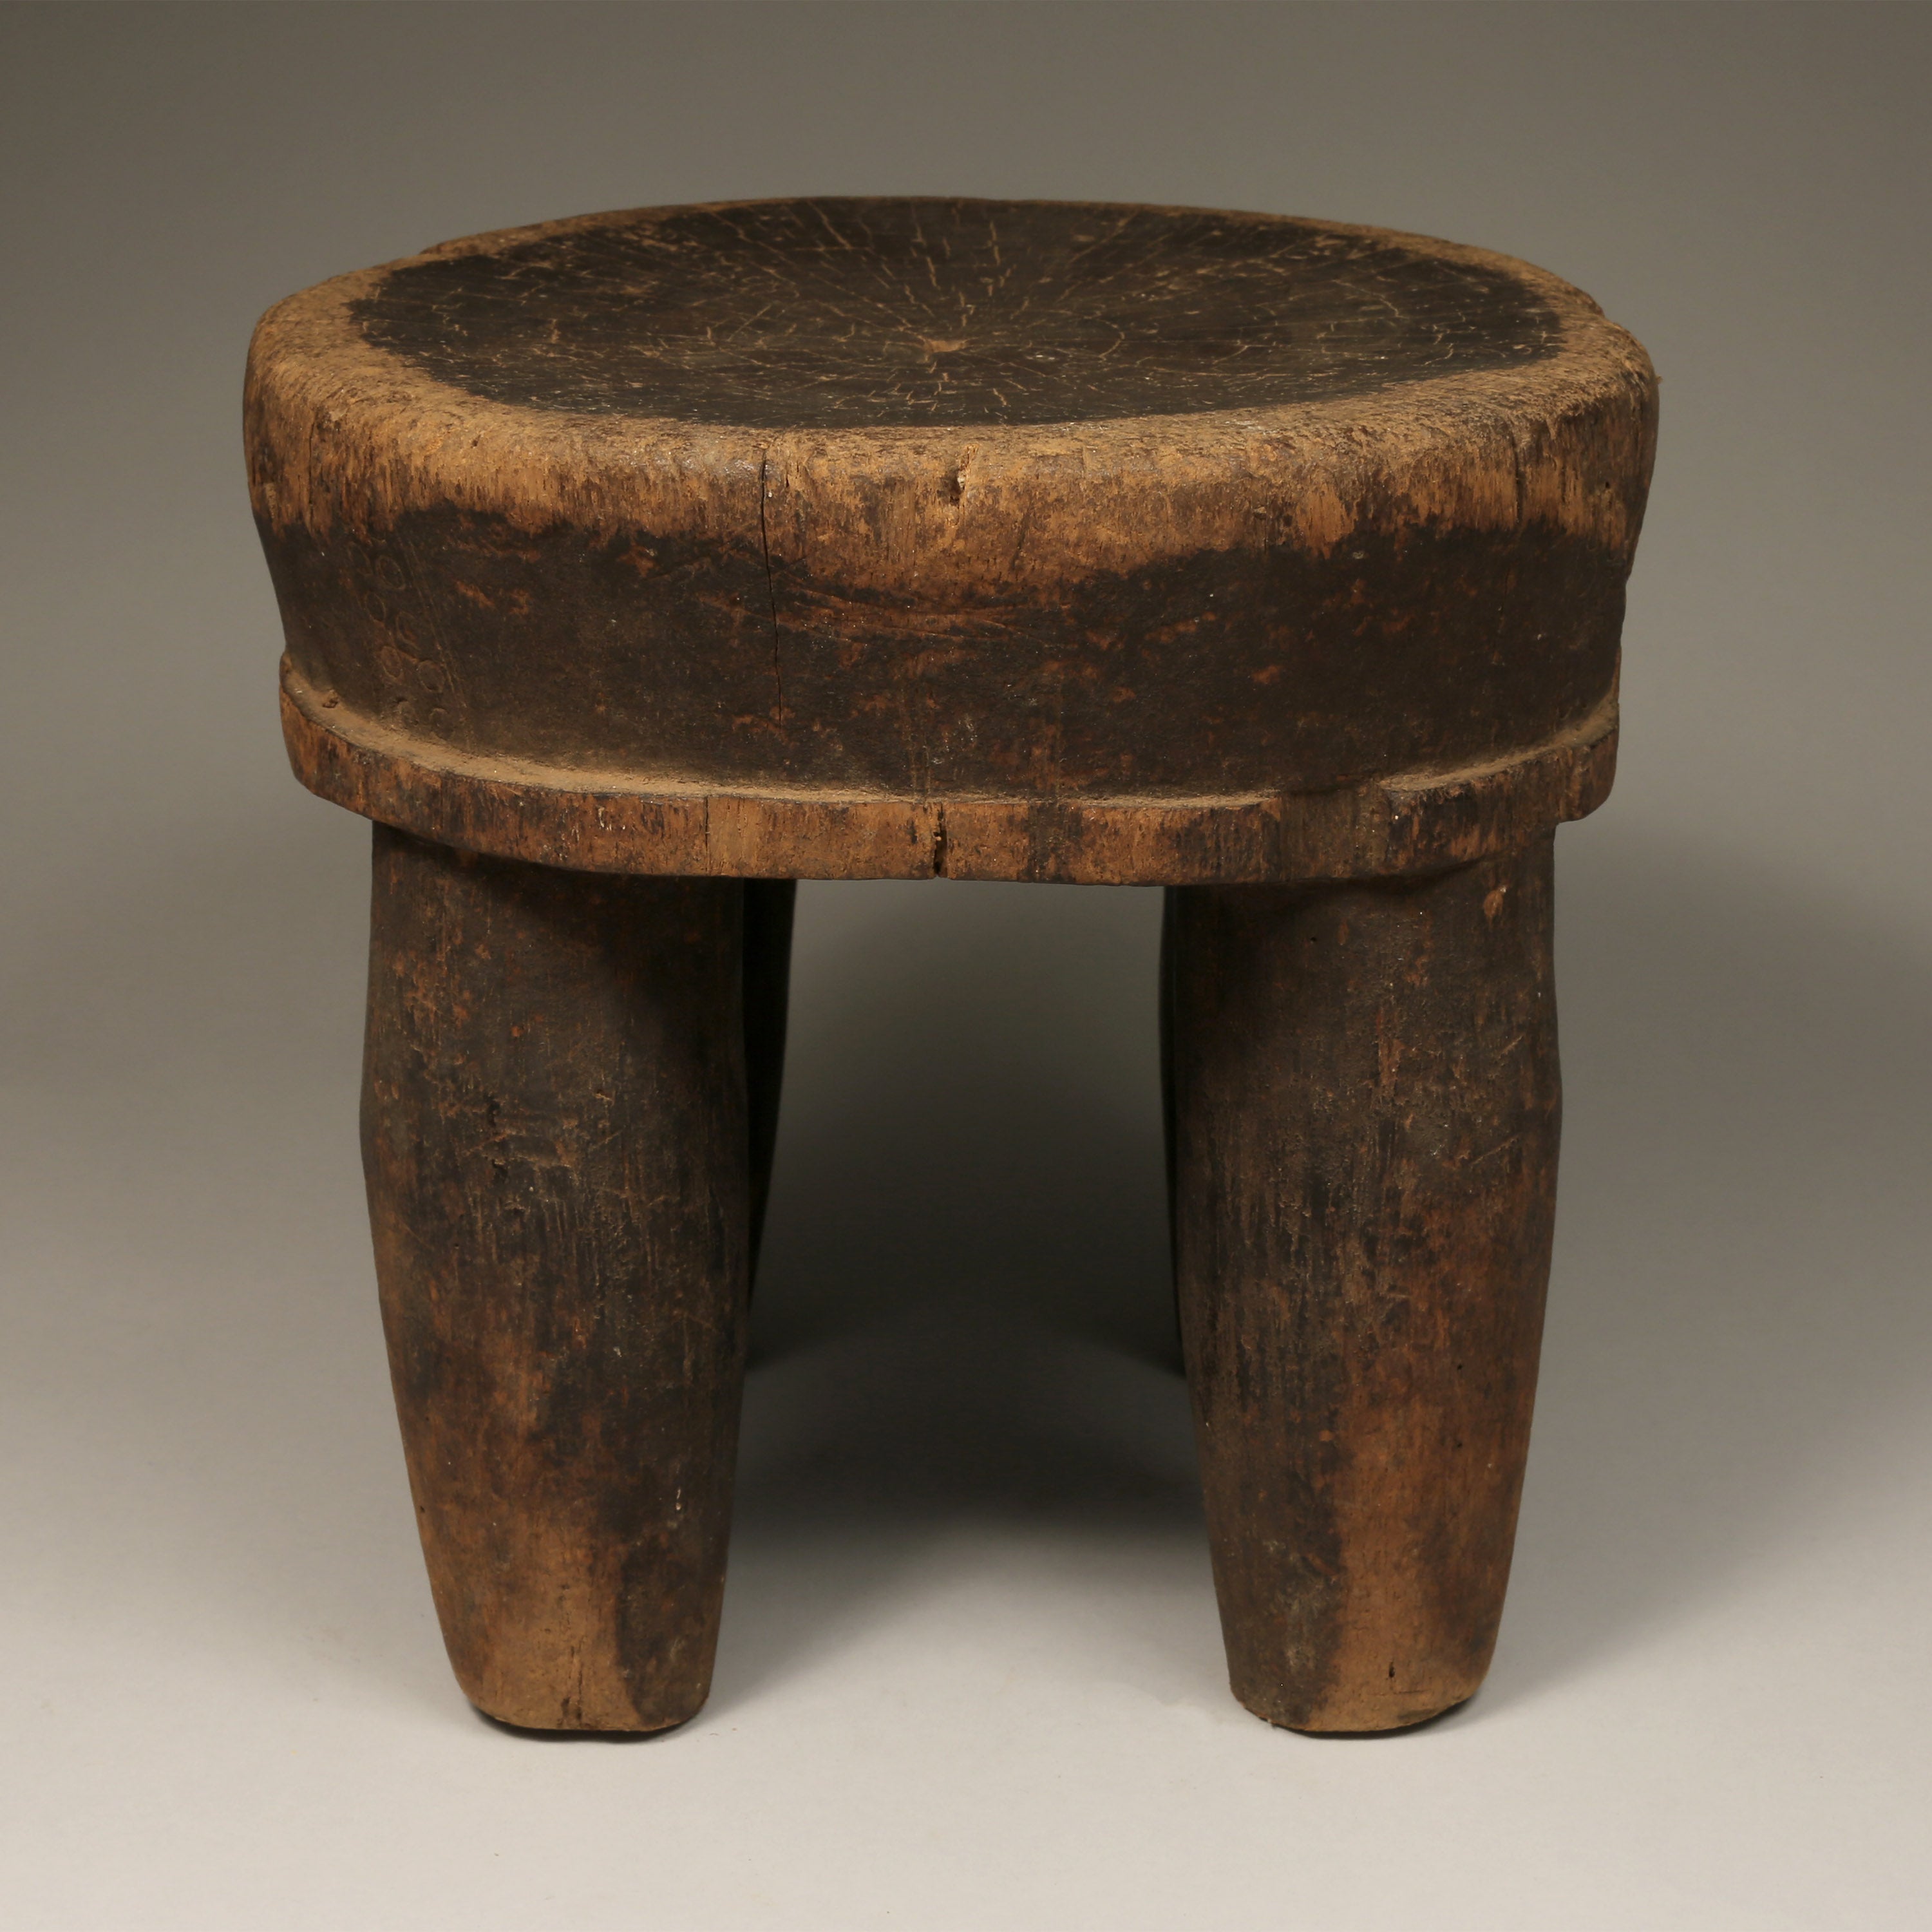 Tribal Furniture - African Art - Home Decor - African Stools - Chairs - Traditional Furniture - Collectible Art - This unique Old Low Stool is crafted from wood originating from the Senufo Tribe of the Ivory Coast. It is an authentic, handmade piece of cultural history, and will become a treasured addition to any home. Height: 10